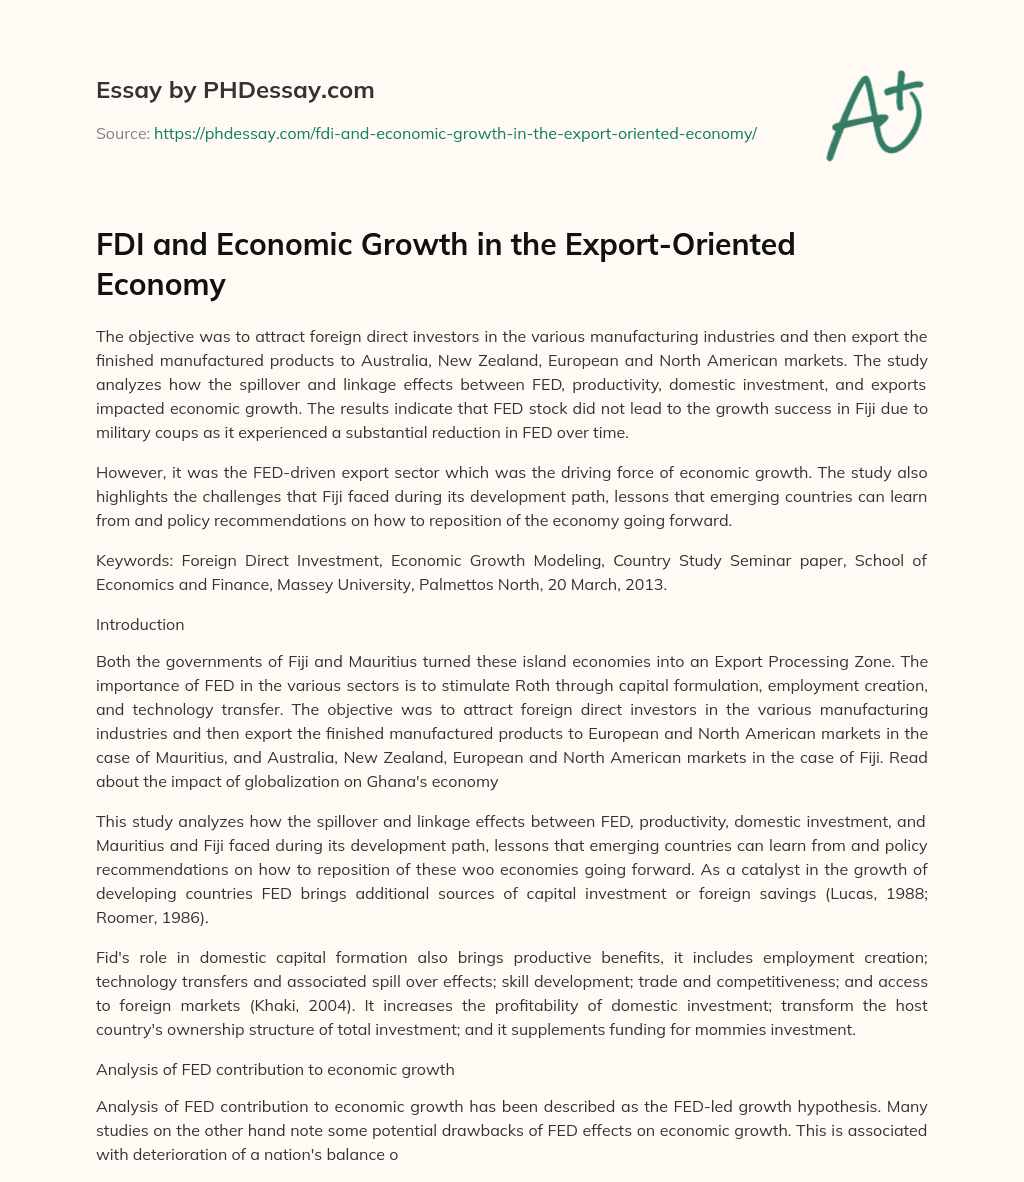 FDI and Economic Growth in the Export-Oriented Economy essay